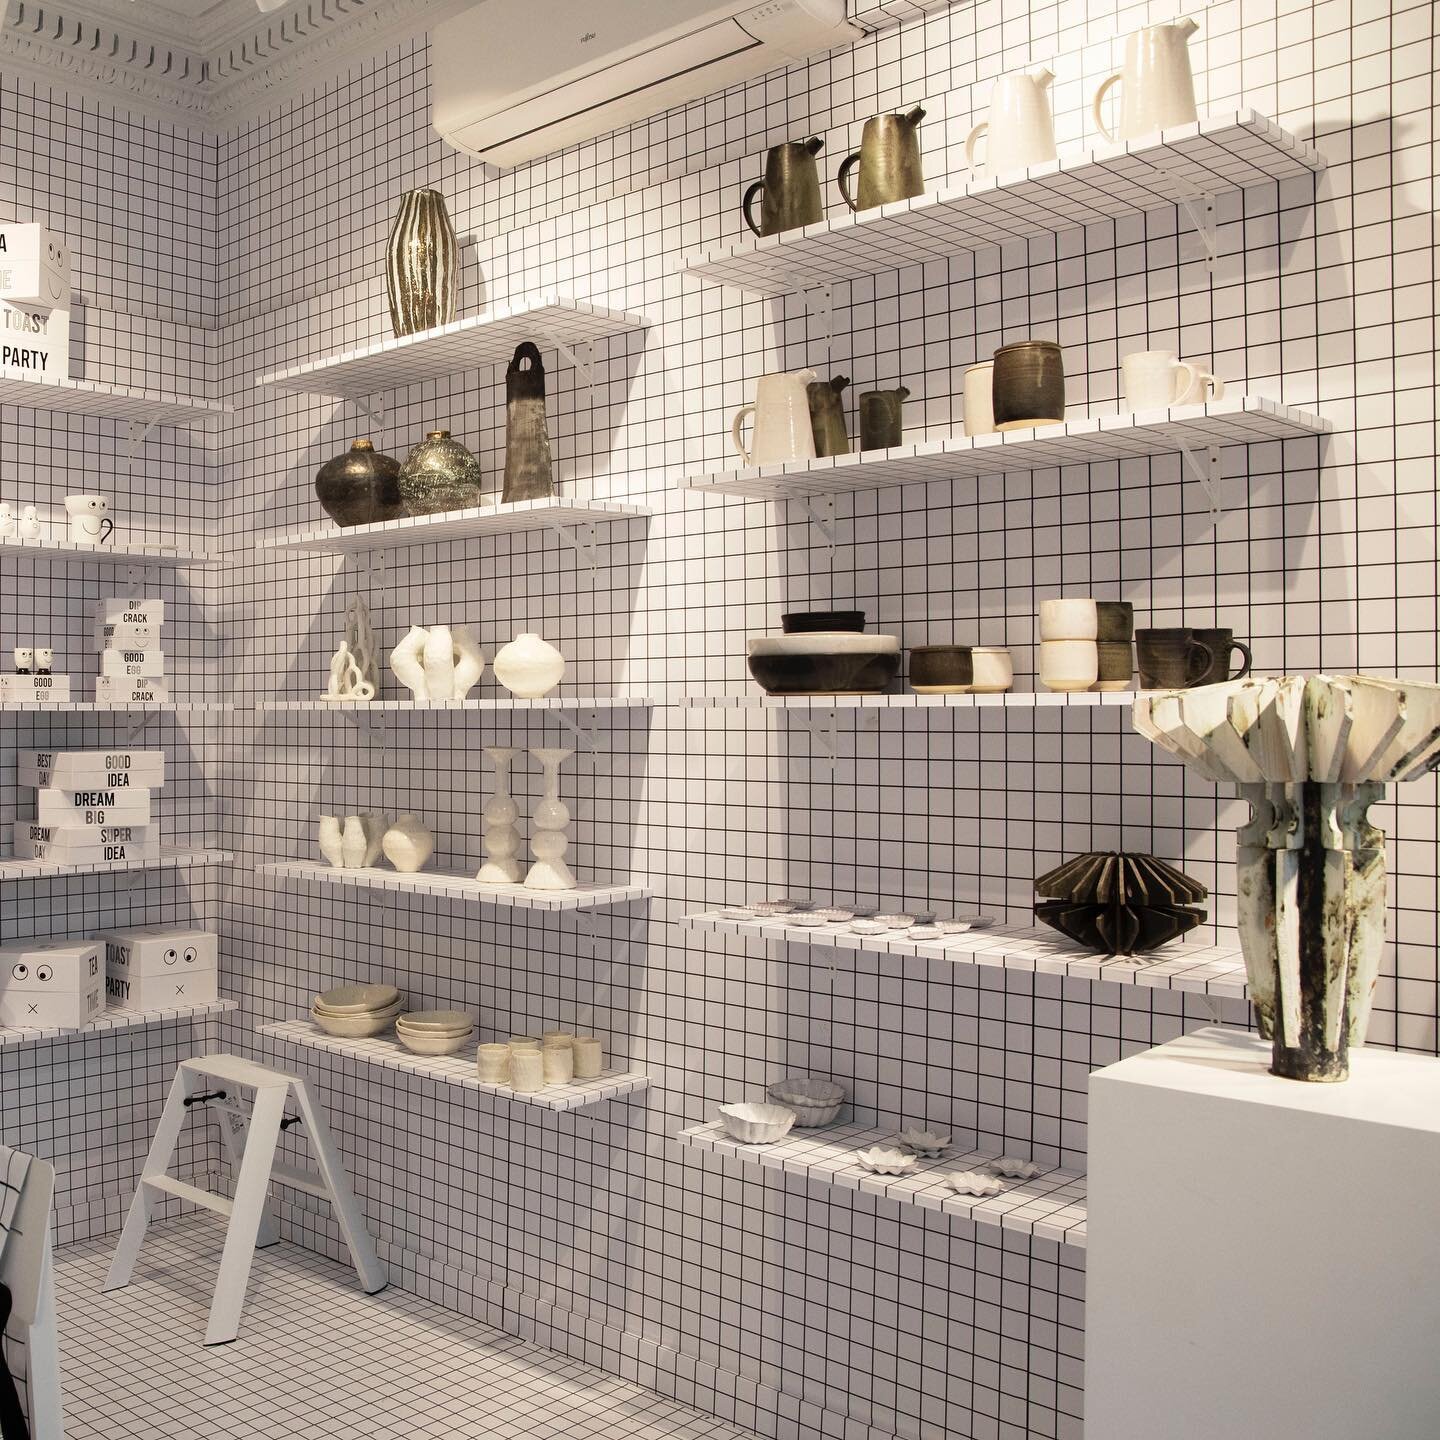 Check out a few of my ceramics in this fantastic pop up concept store in Pond St London by @anyahindmarch 
.

ARRIVING AT THE VILLAGE FROM THE 13 MAY
Introducing the first Anya Hindmarch ceramics collection, a new range of tableware and accessories i